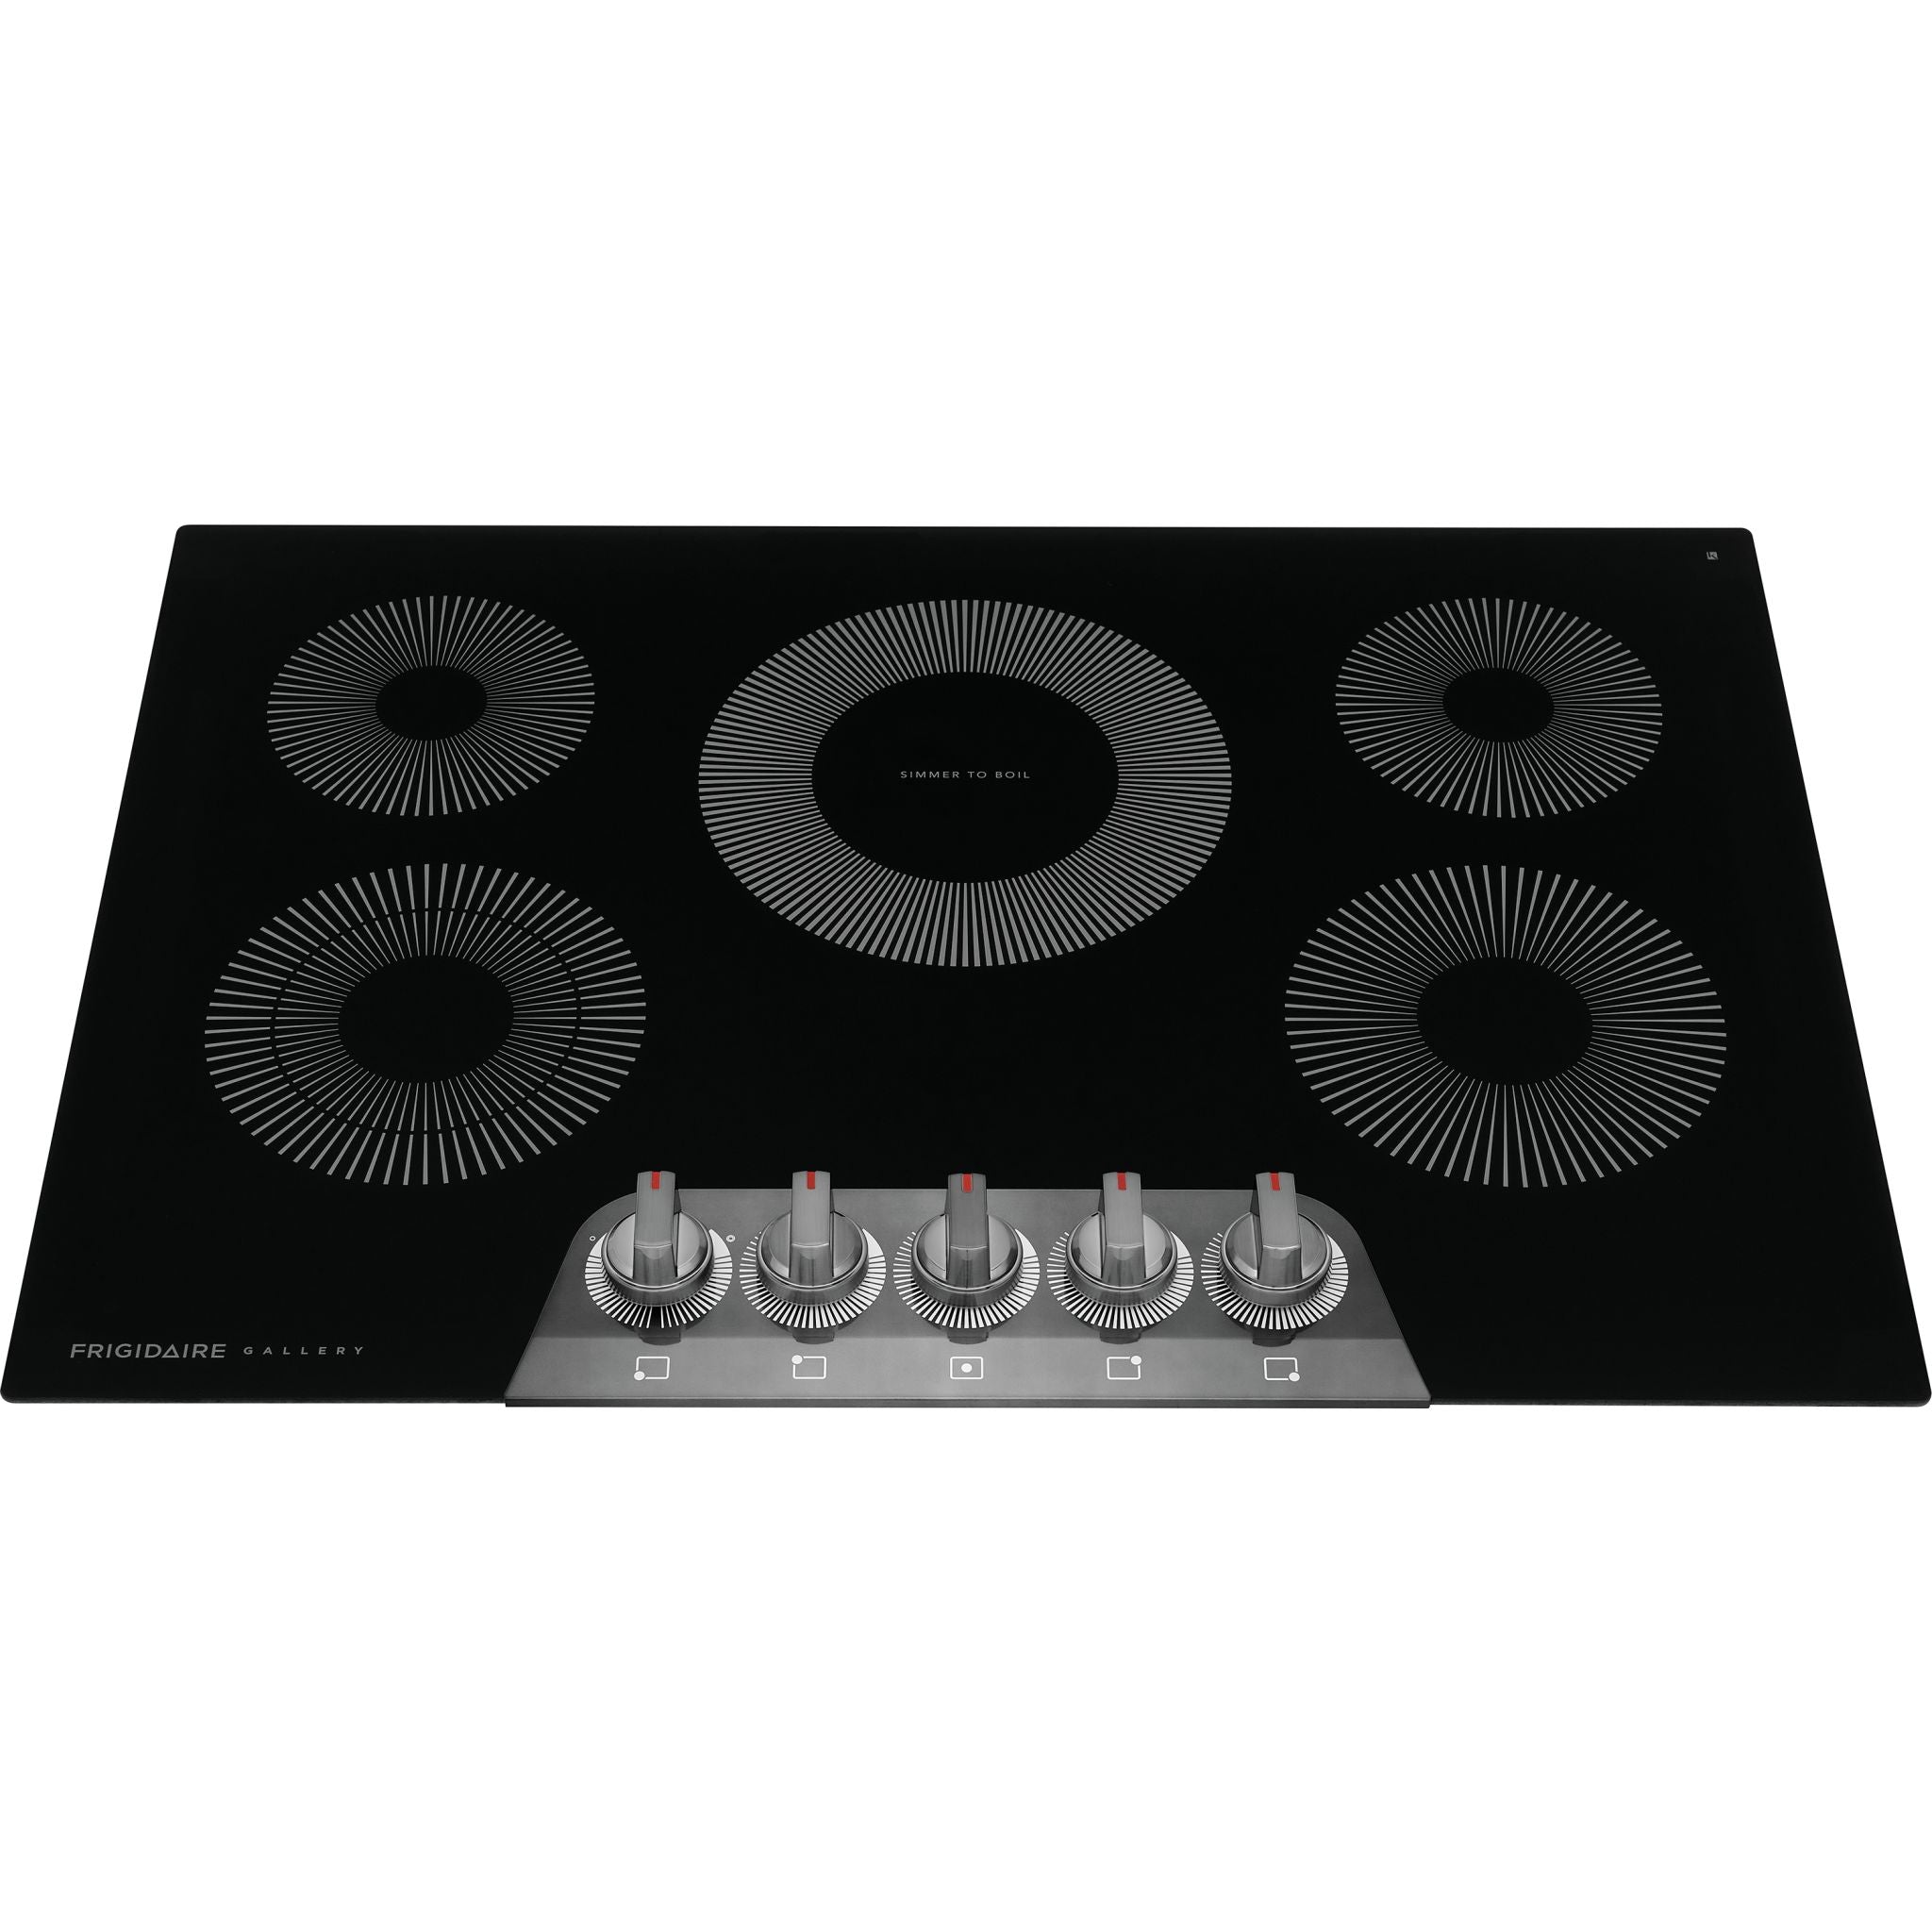 Frigidaire Gallery, Frigidaire Gallery 30" Cooktop (GCCE3070AD) - Black Stainless